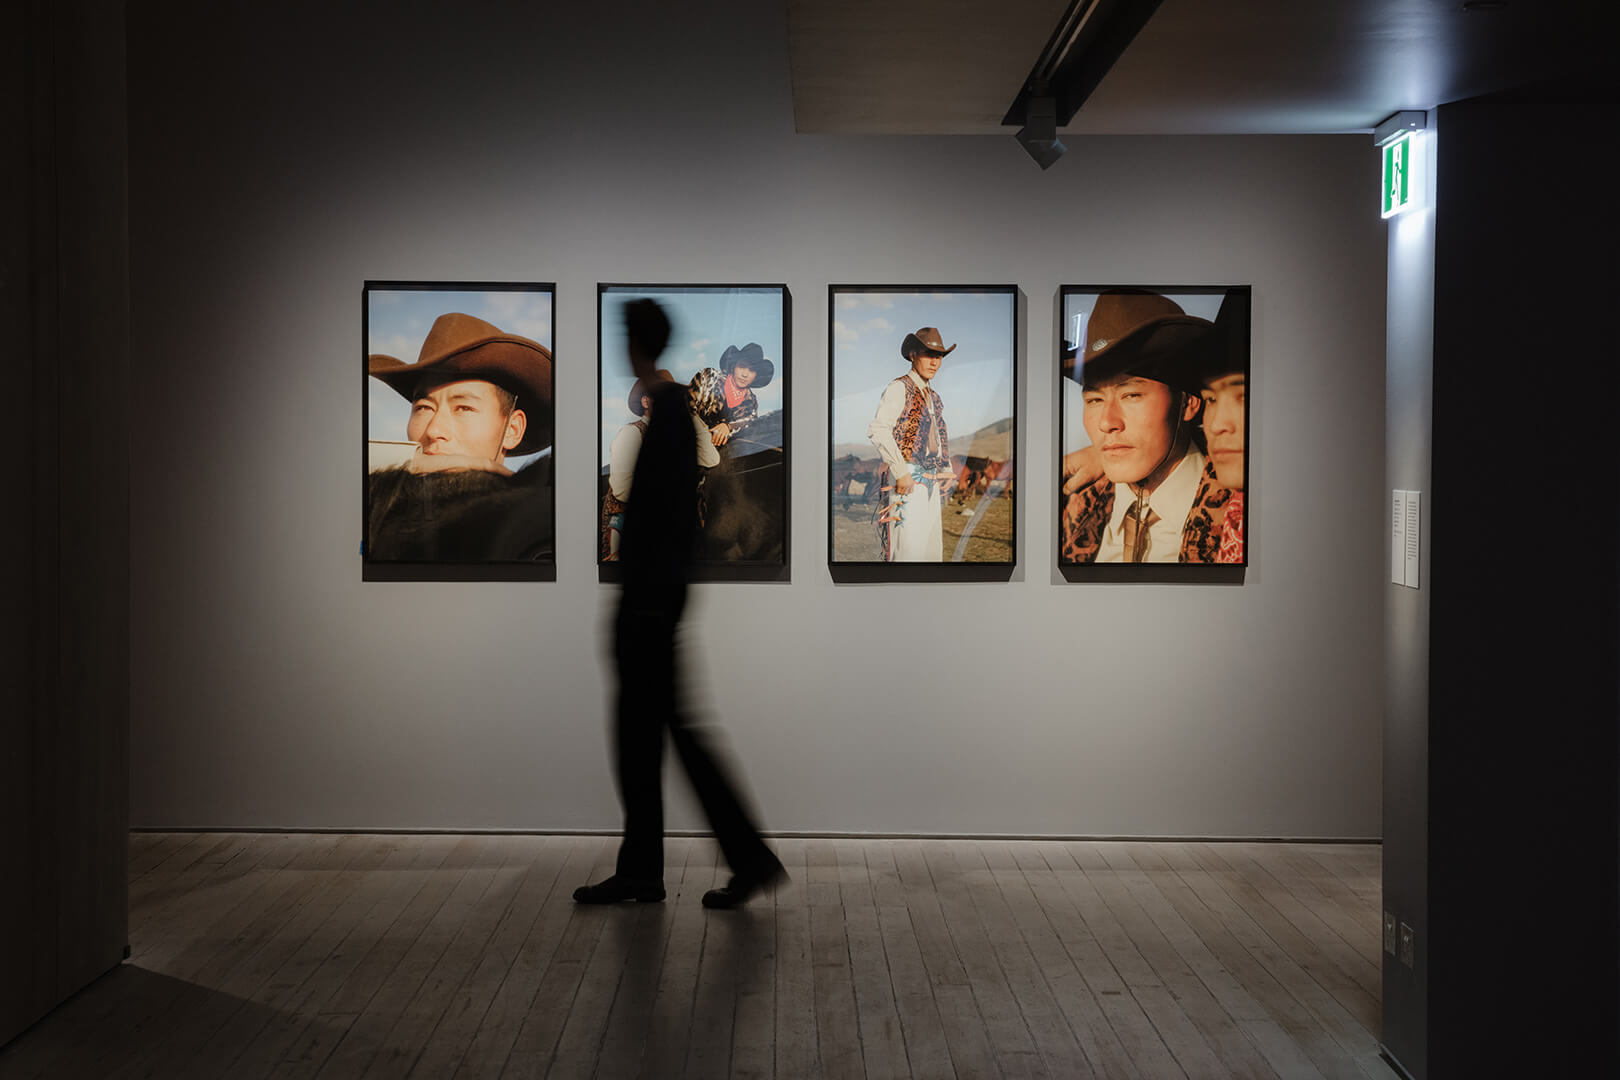 White rabbit Gallery, I am the people exhibition, HAILUN MA, Xinjiang Cowboys artwork